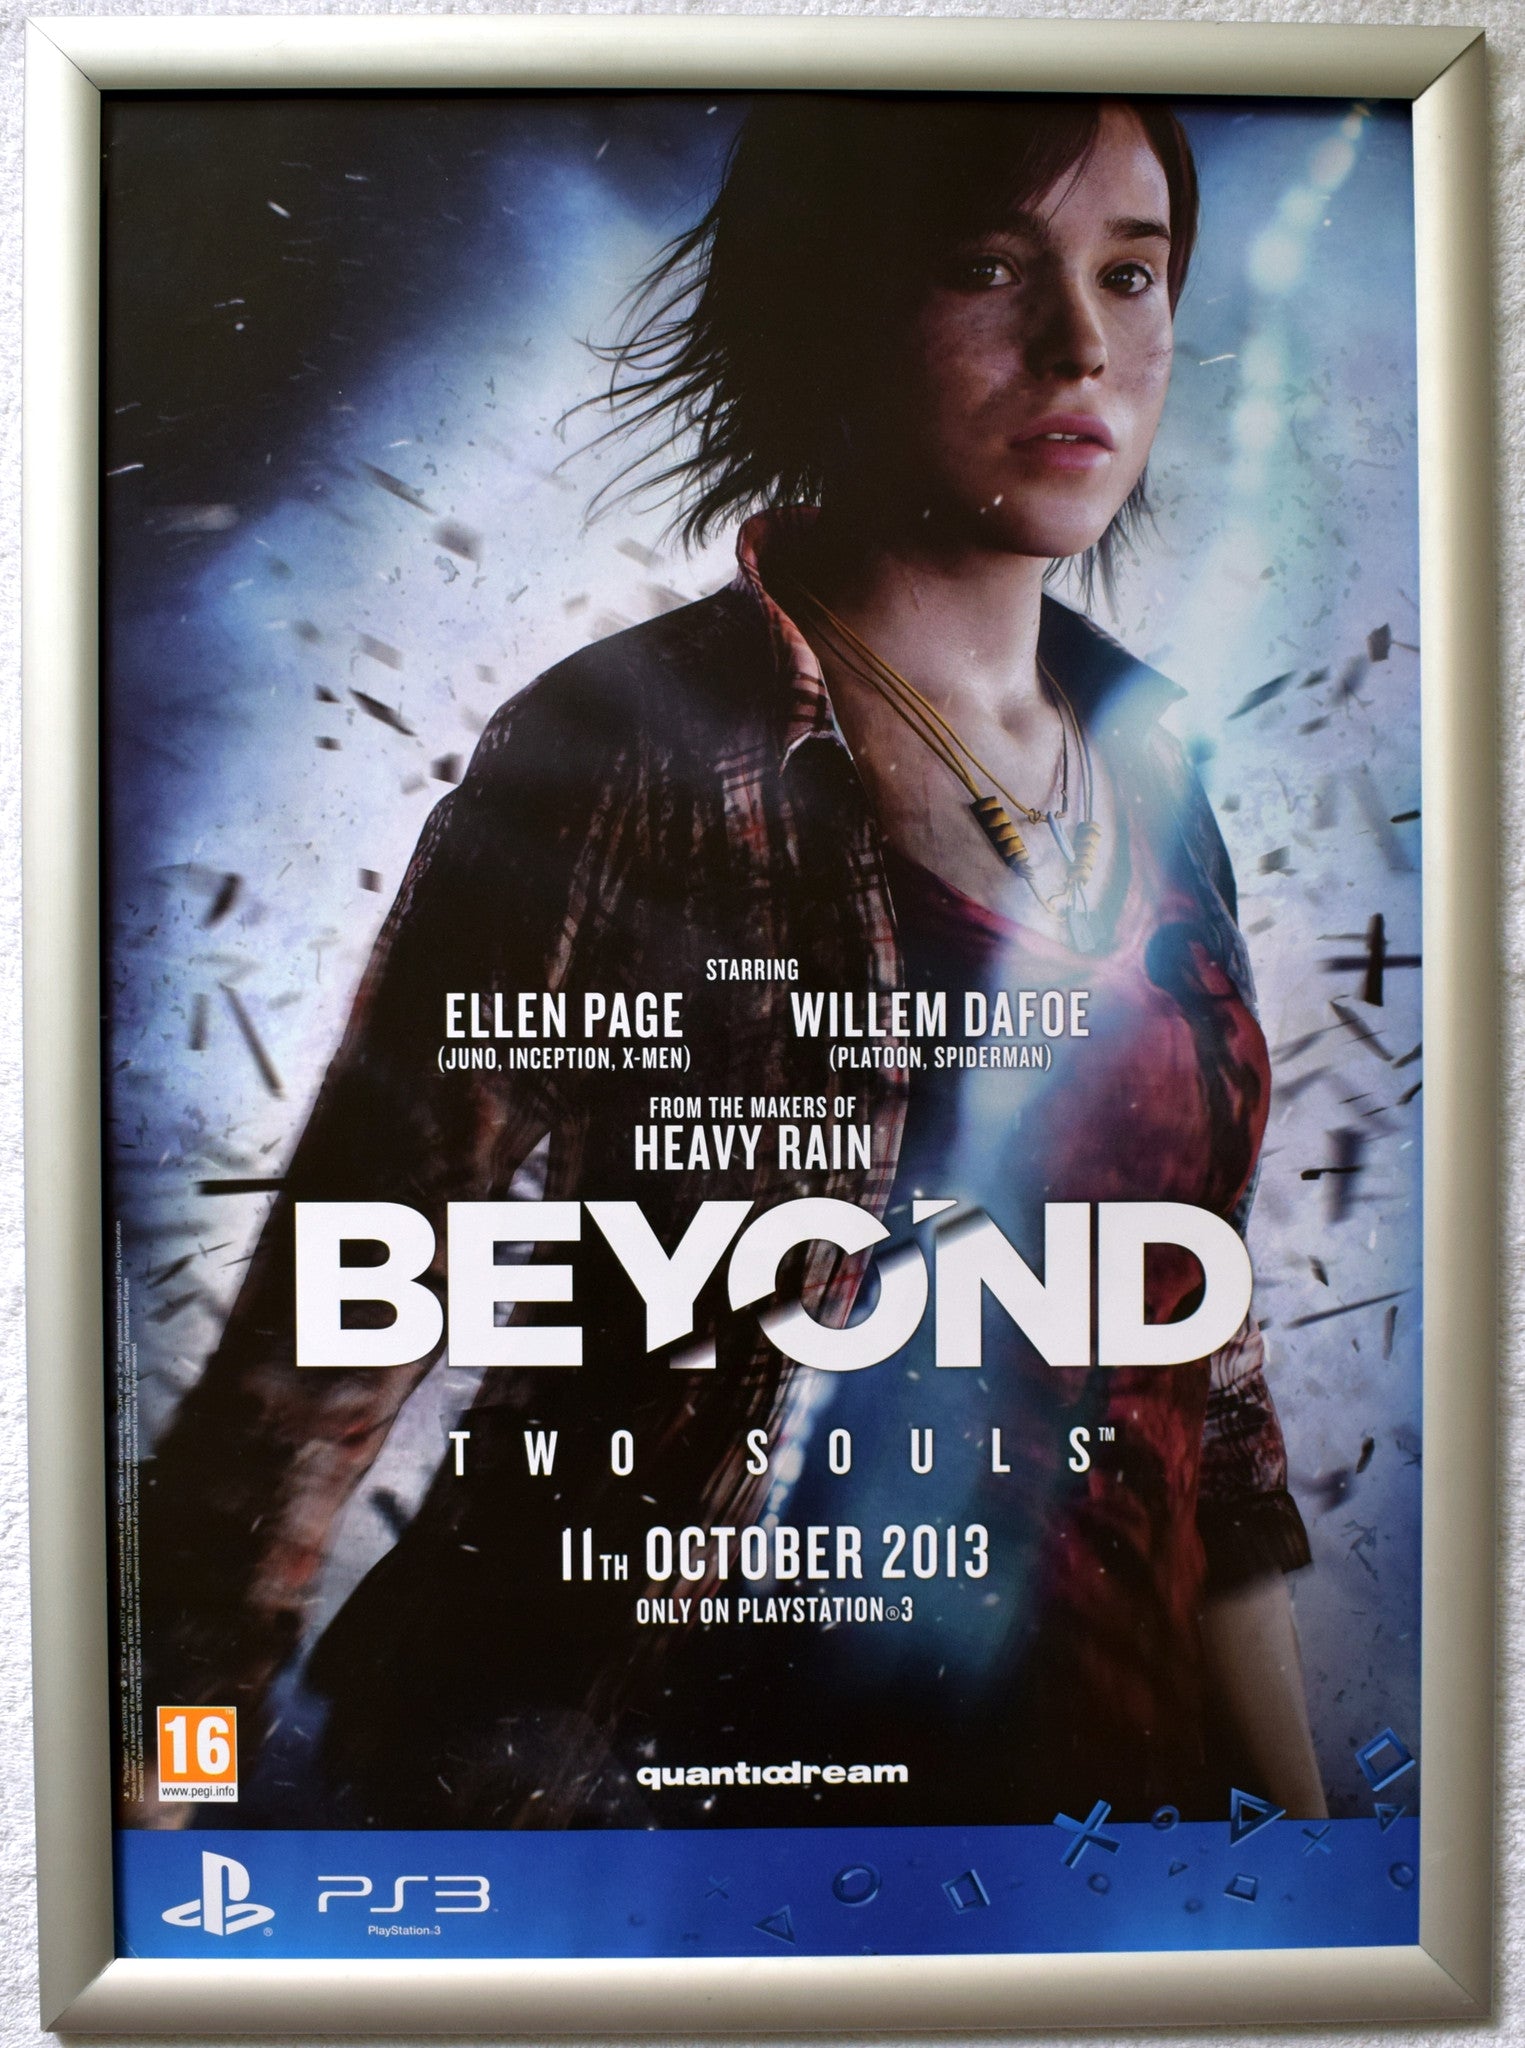 Beyond Two Souls (A2) Promotional Poster #1